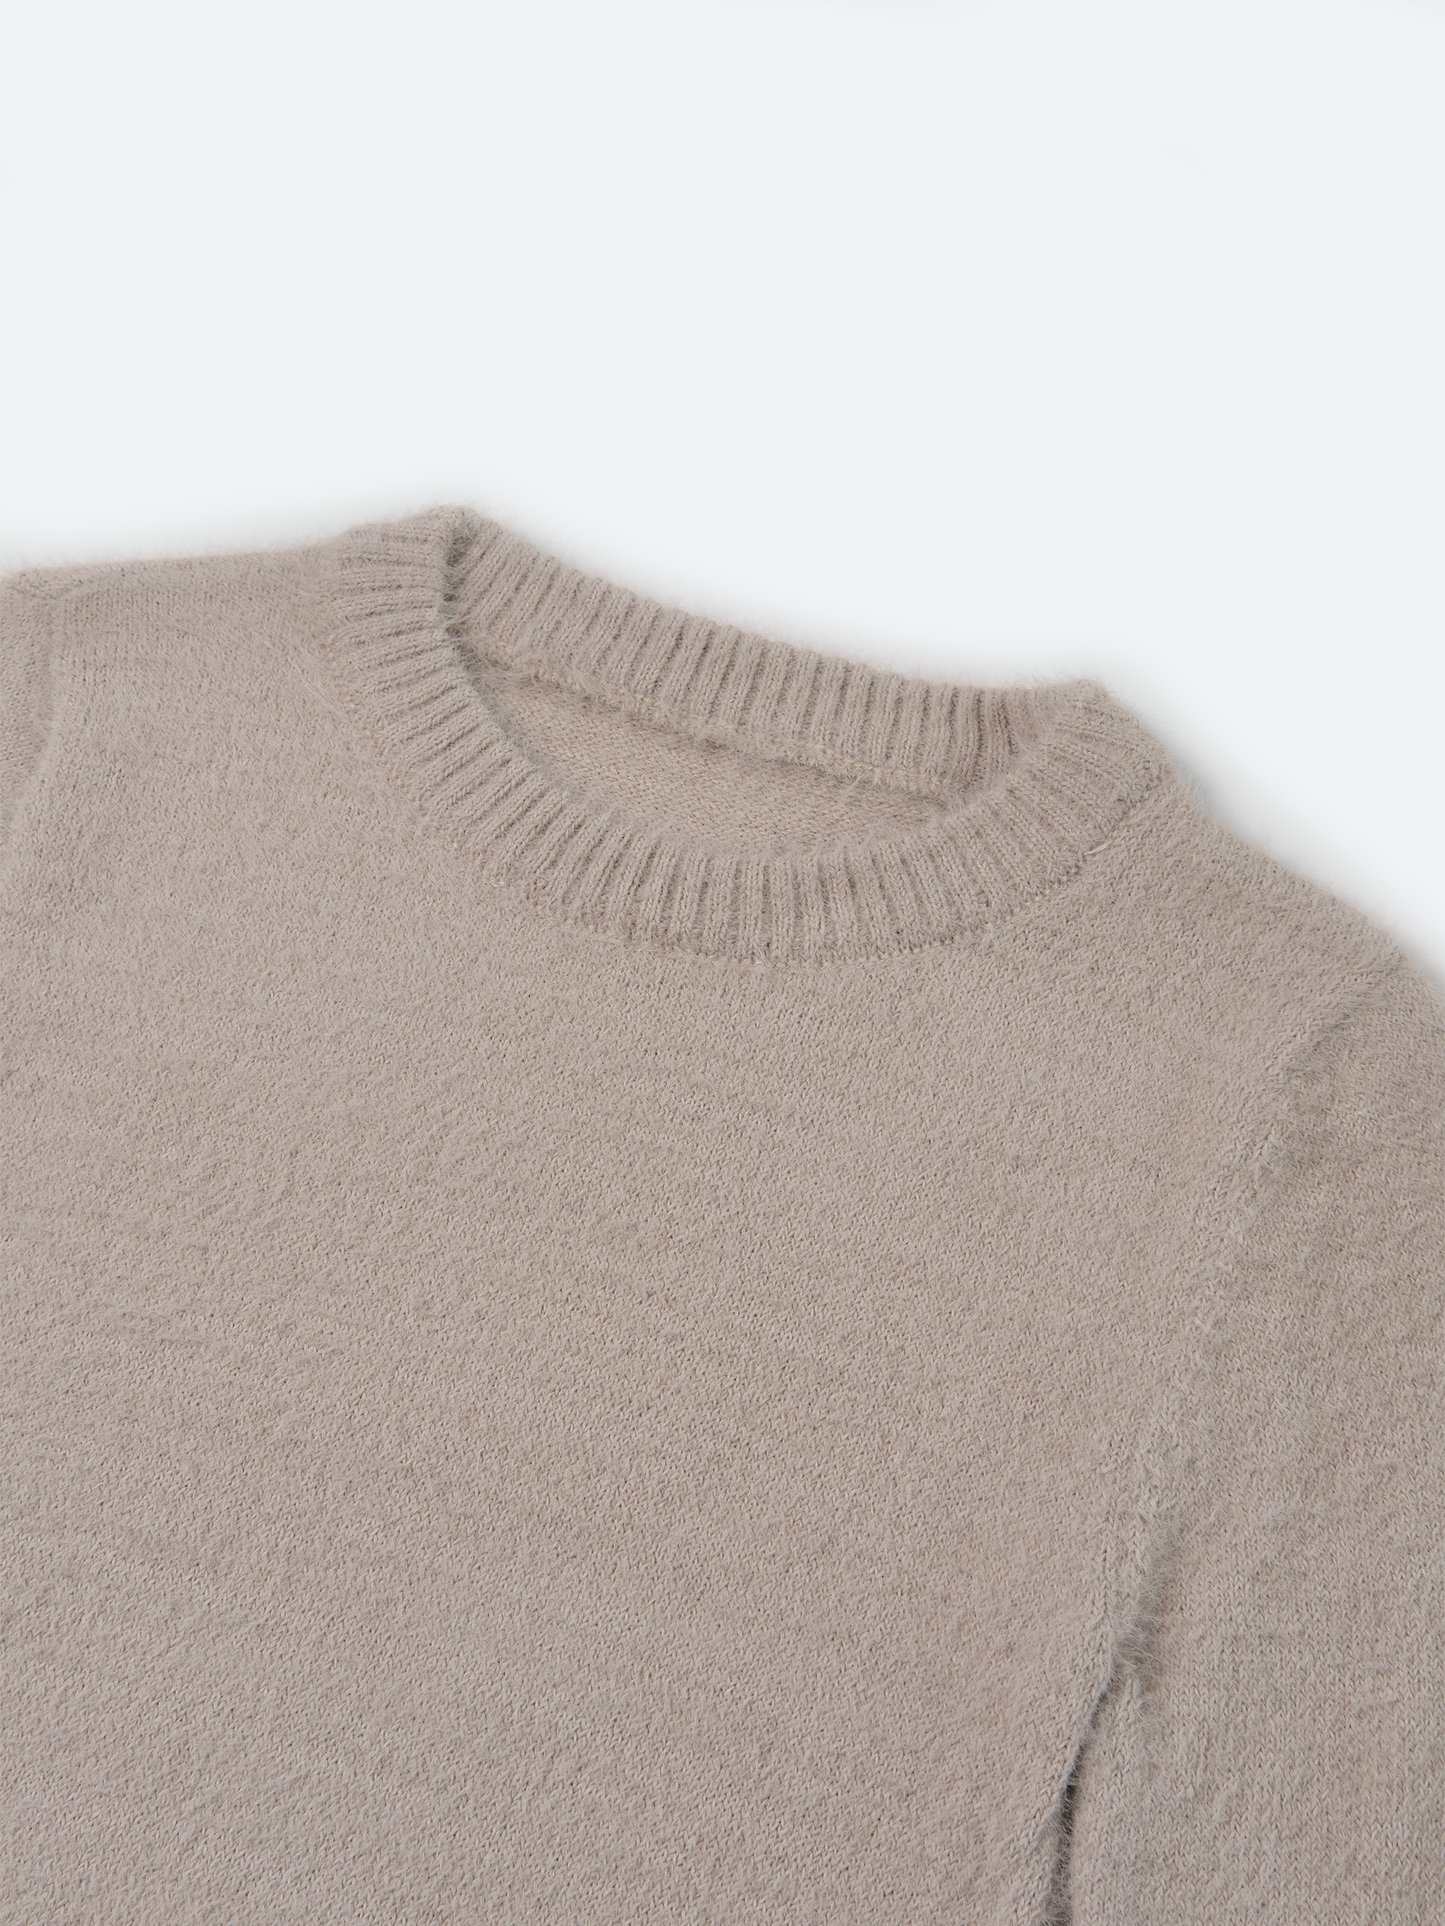 wmns-ivory-brushed-knit-sweater-FRAGILE-CLUB-astoud